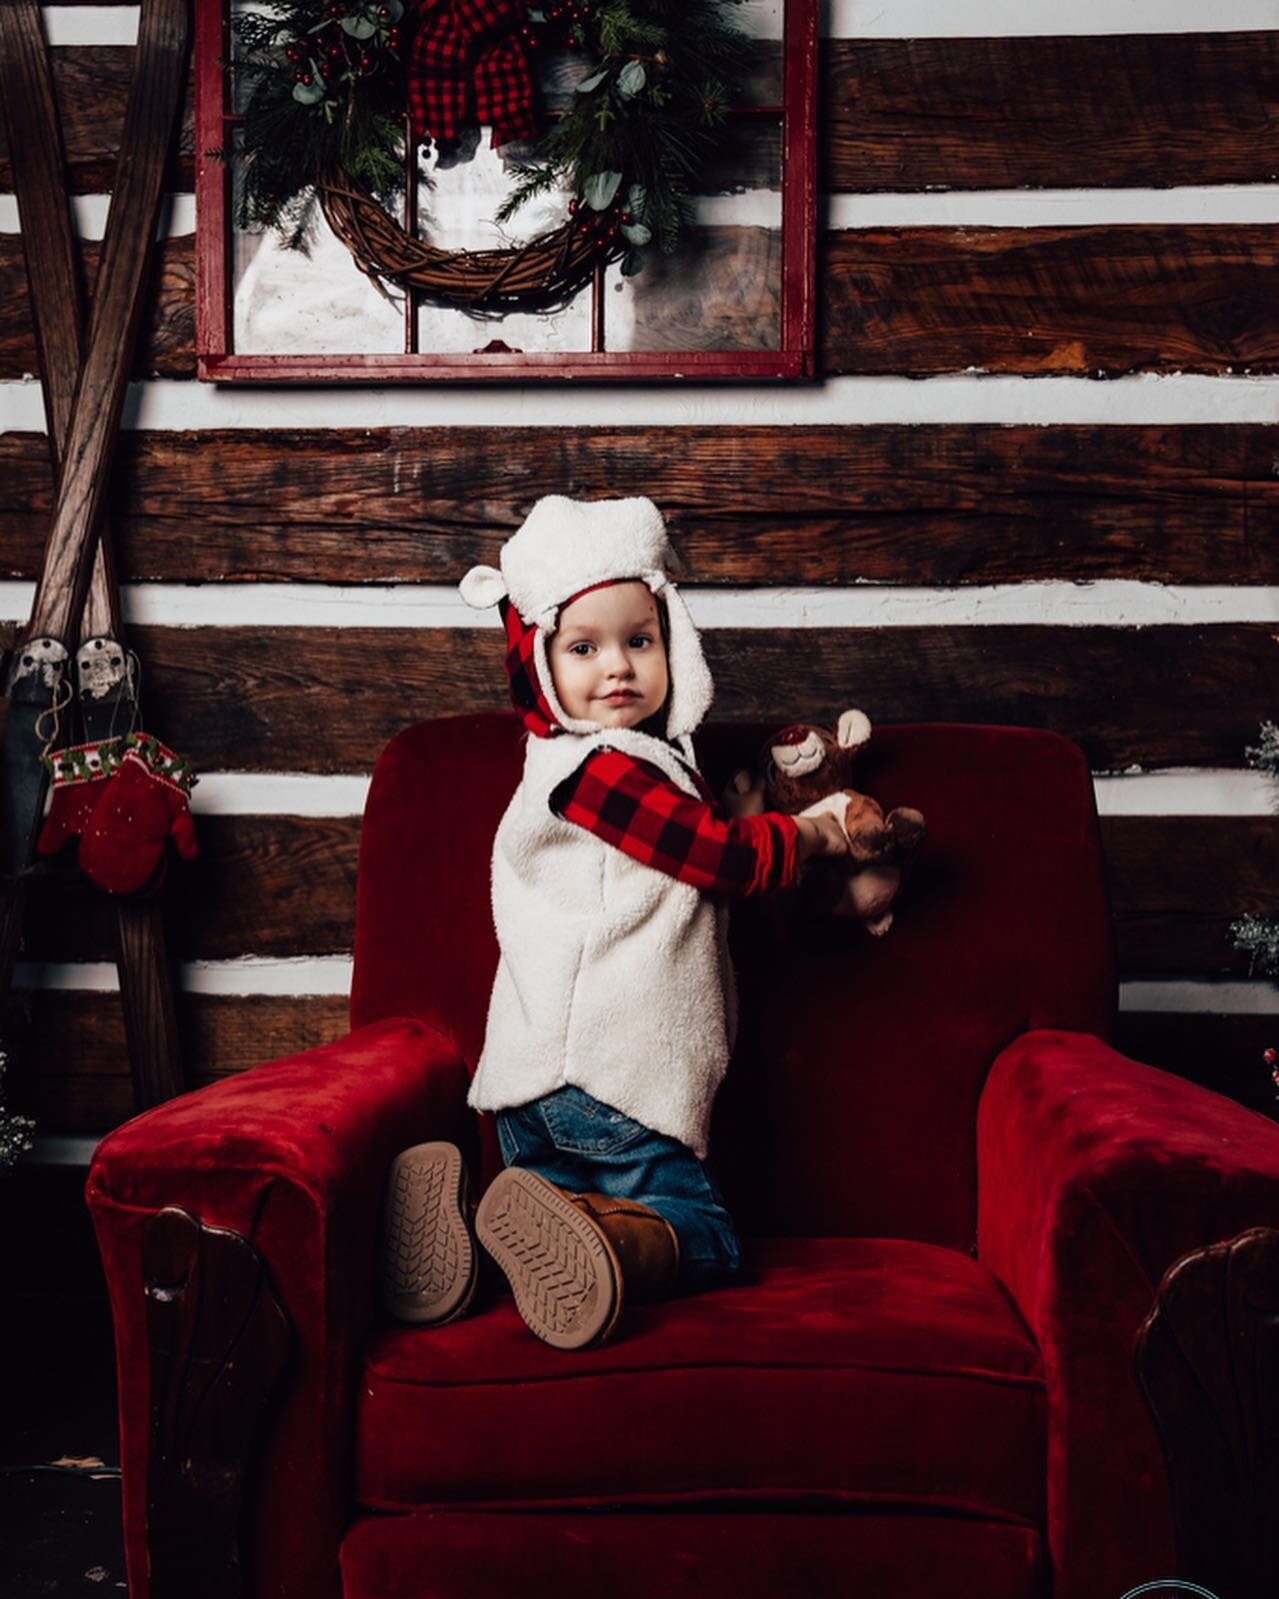 Pictures from my first annual Christmas Photo Pop-Up Event @picklesgapvillage #holidays #photo #sonya7iii